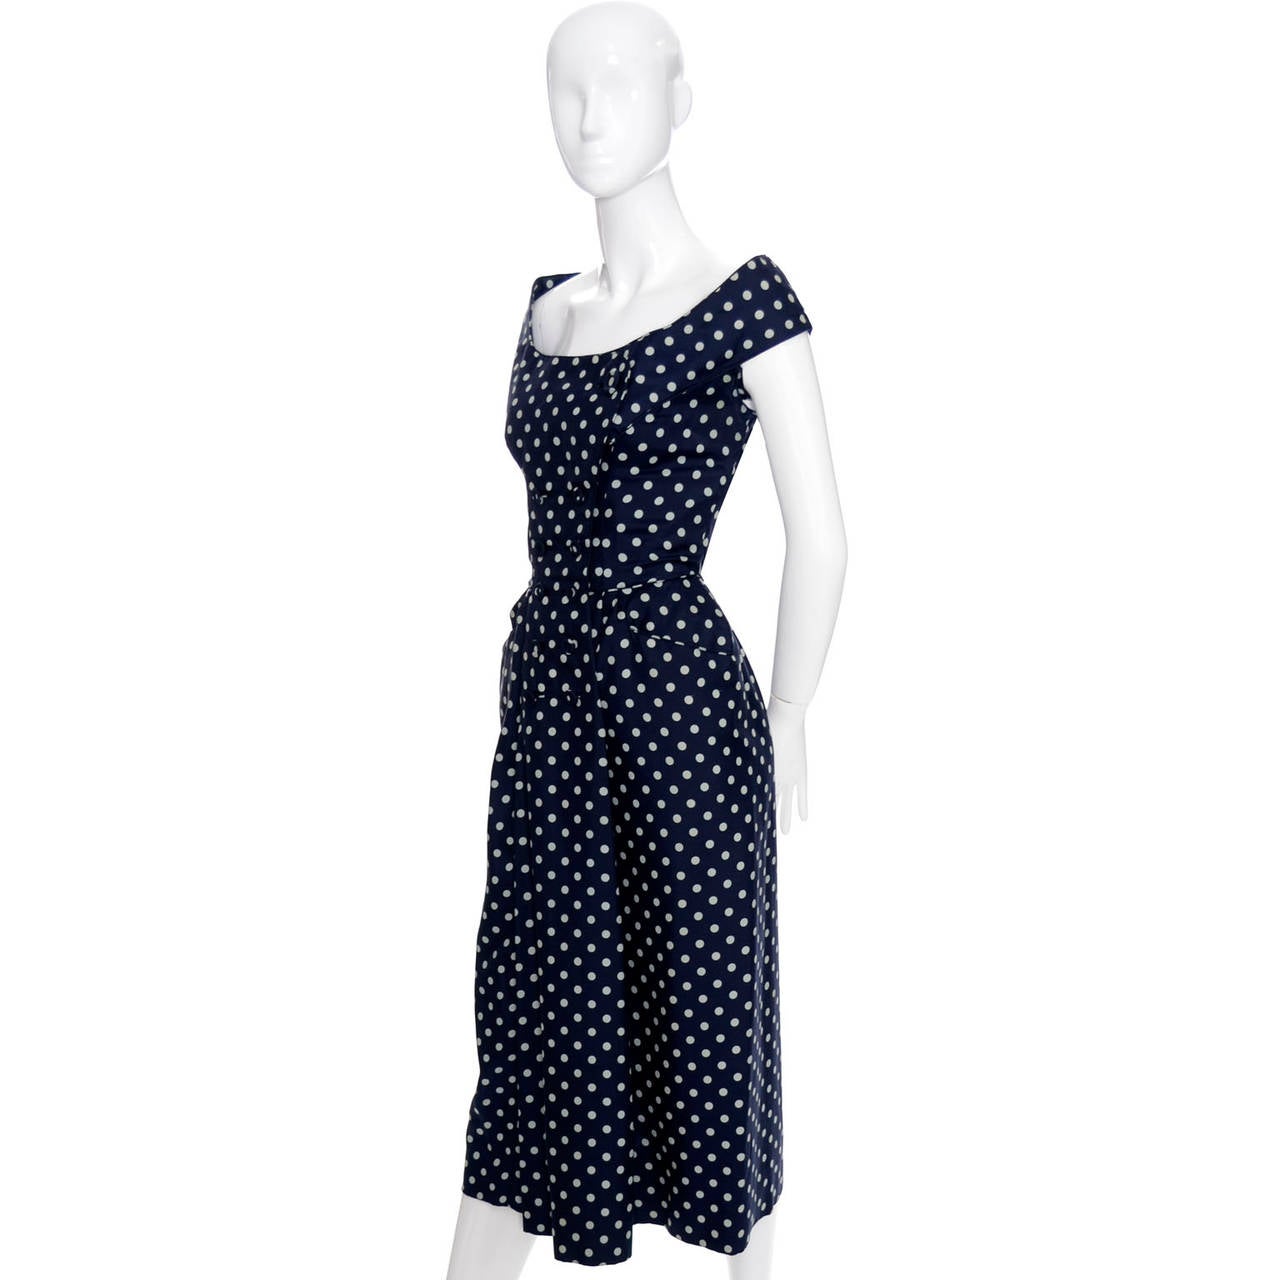 This outstanding vintage dress is from the 1950s and was designed by Ceil Chapman.  This incredible dress in in excellent condition with a slightly off shoulder neckline, double breasted bodice with fabric covered buttons, really nice piping detail,